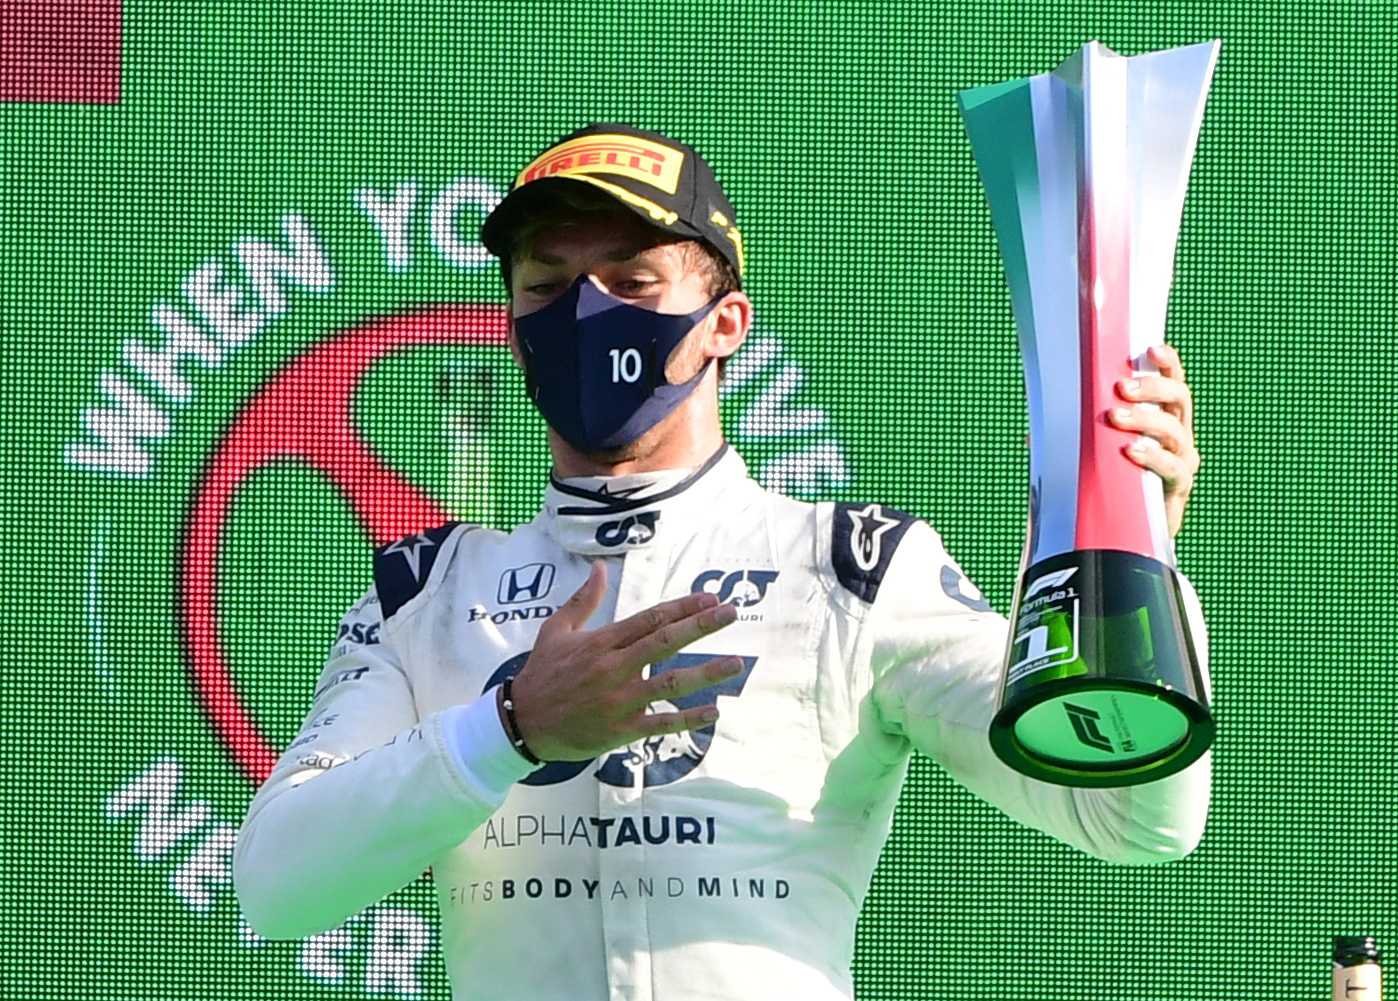 Pierre Gasly celebrates after winning the Italian Grand Prix for AlphaTauri